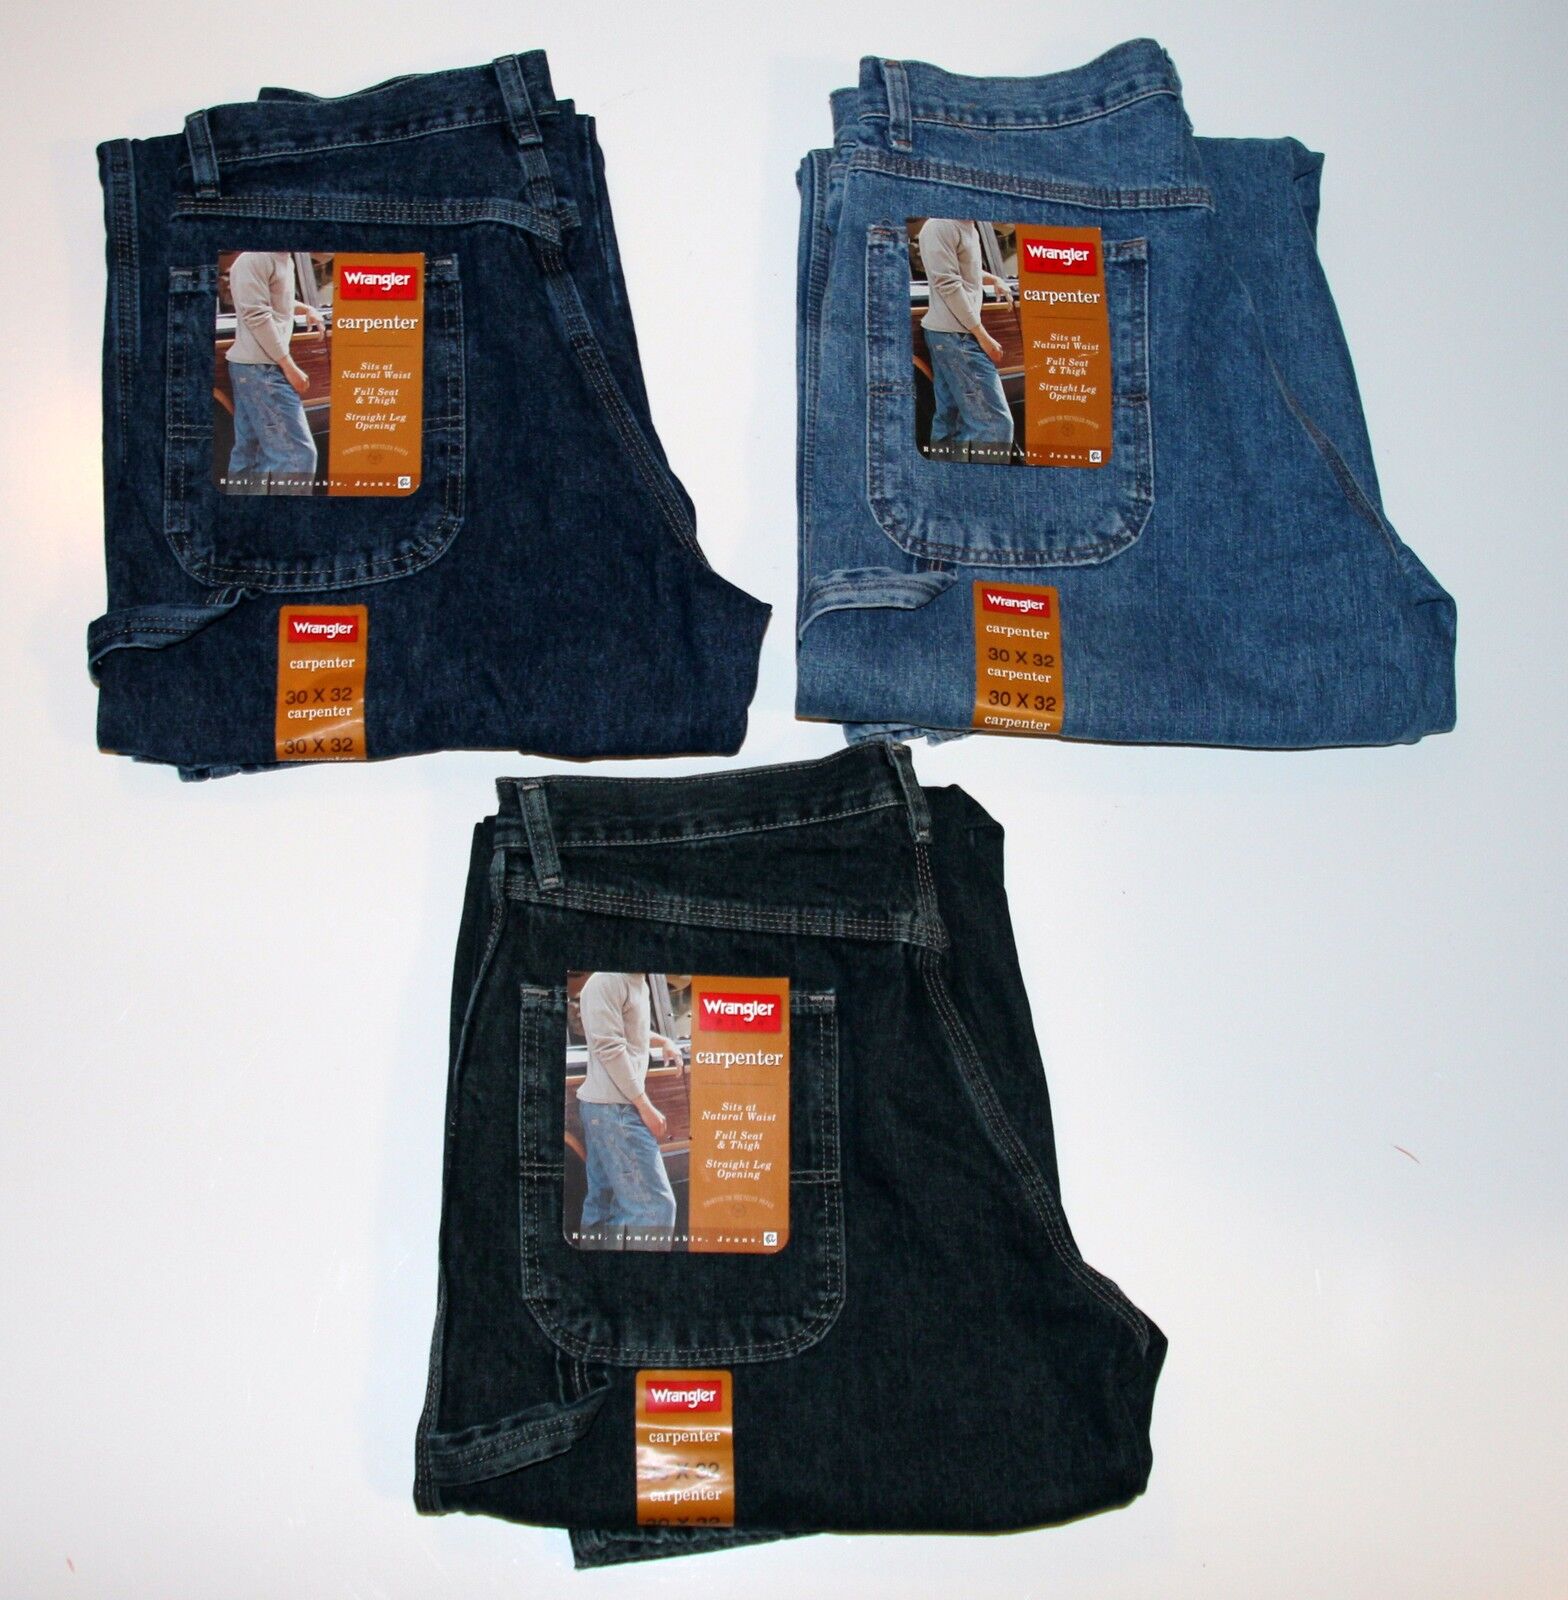 New Wrangler Men's Carpenter Jeans All sizes Three Colors Relaxed Fit | eBay